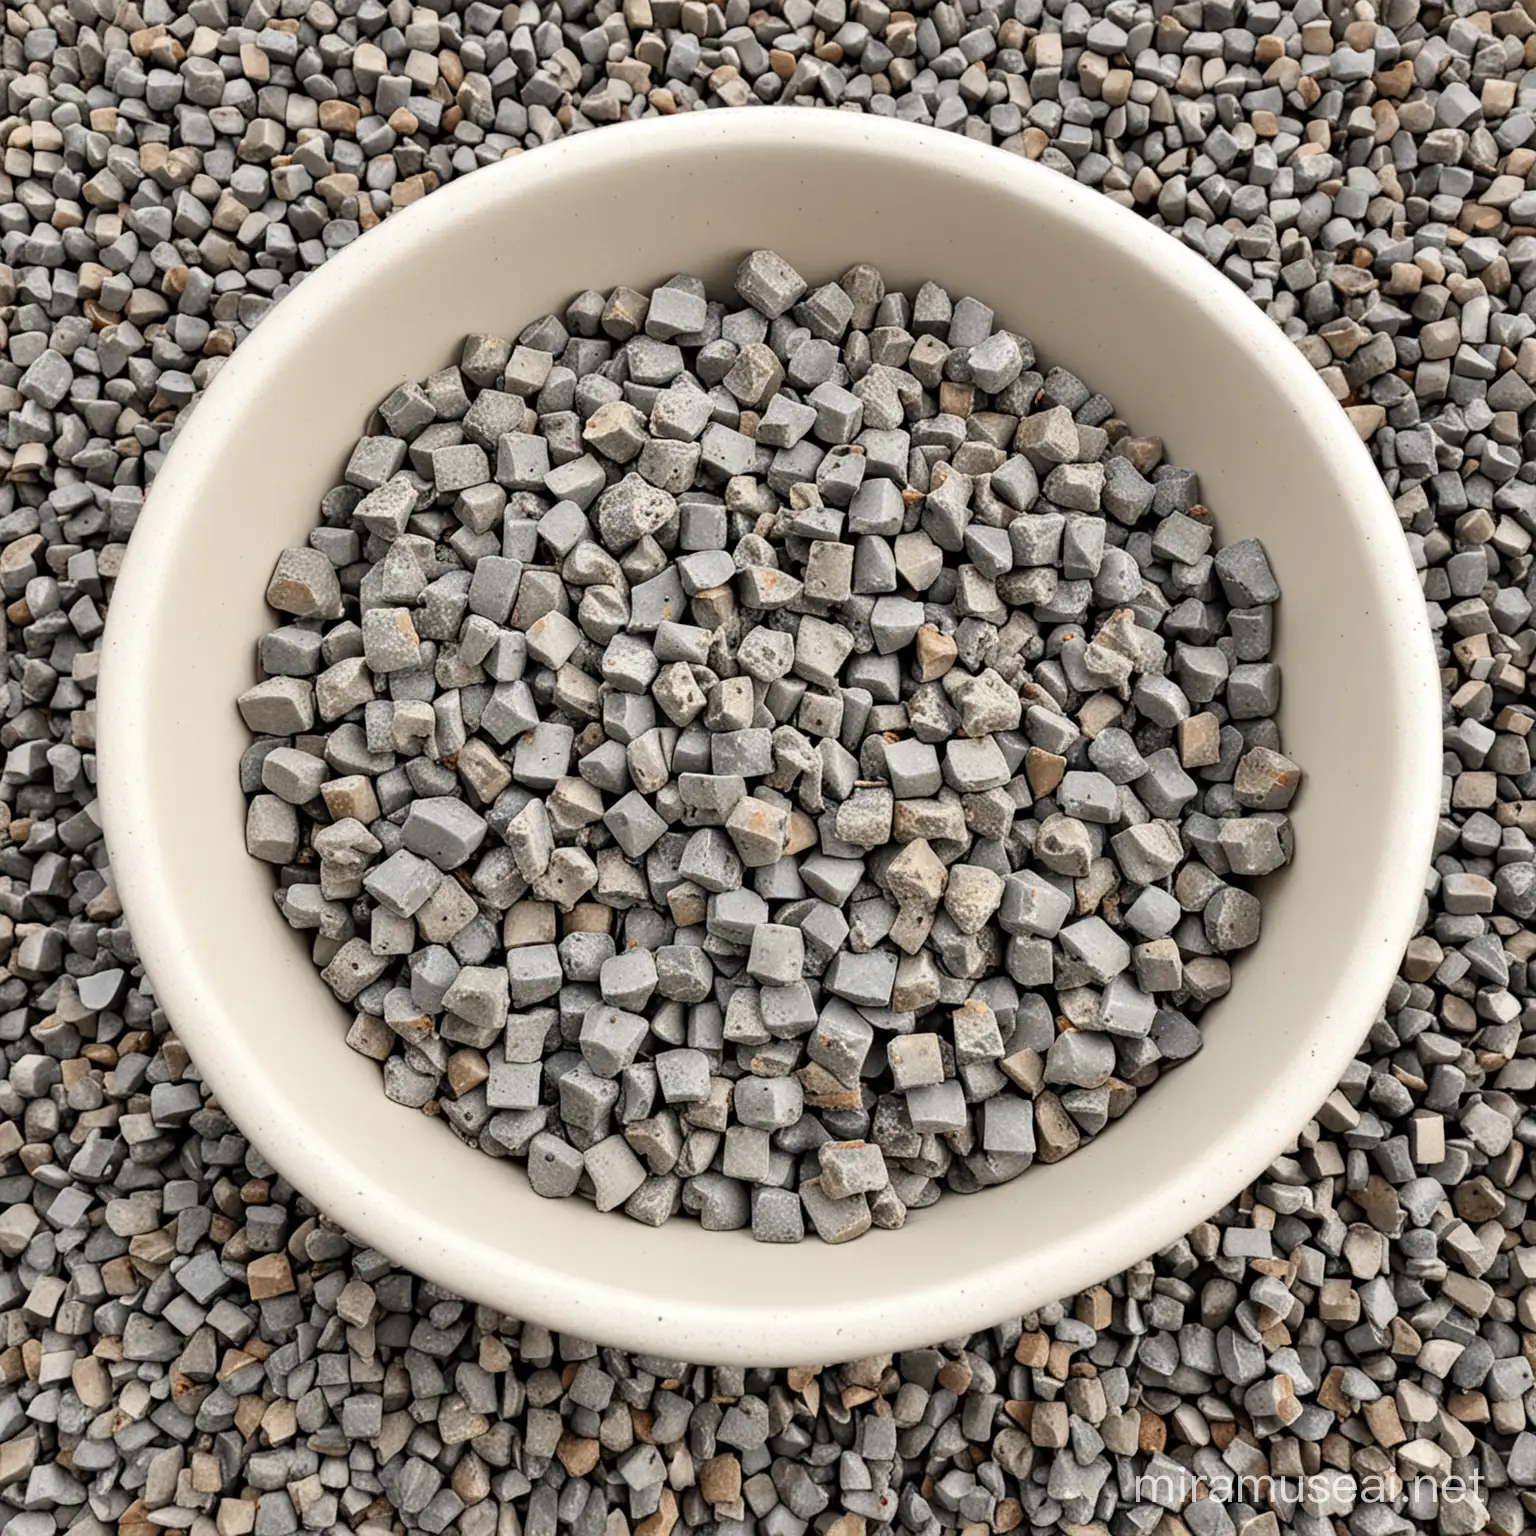 Recycled Aggregate Concrete in Bowl Sustainable Construction Material Displayed